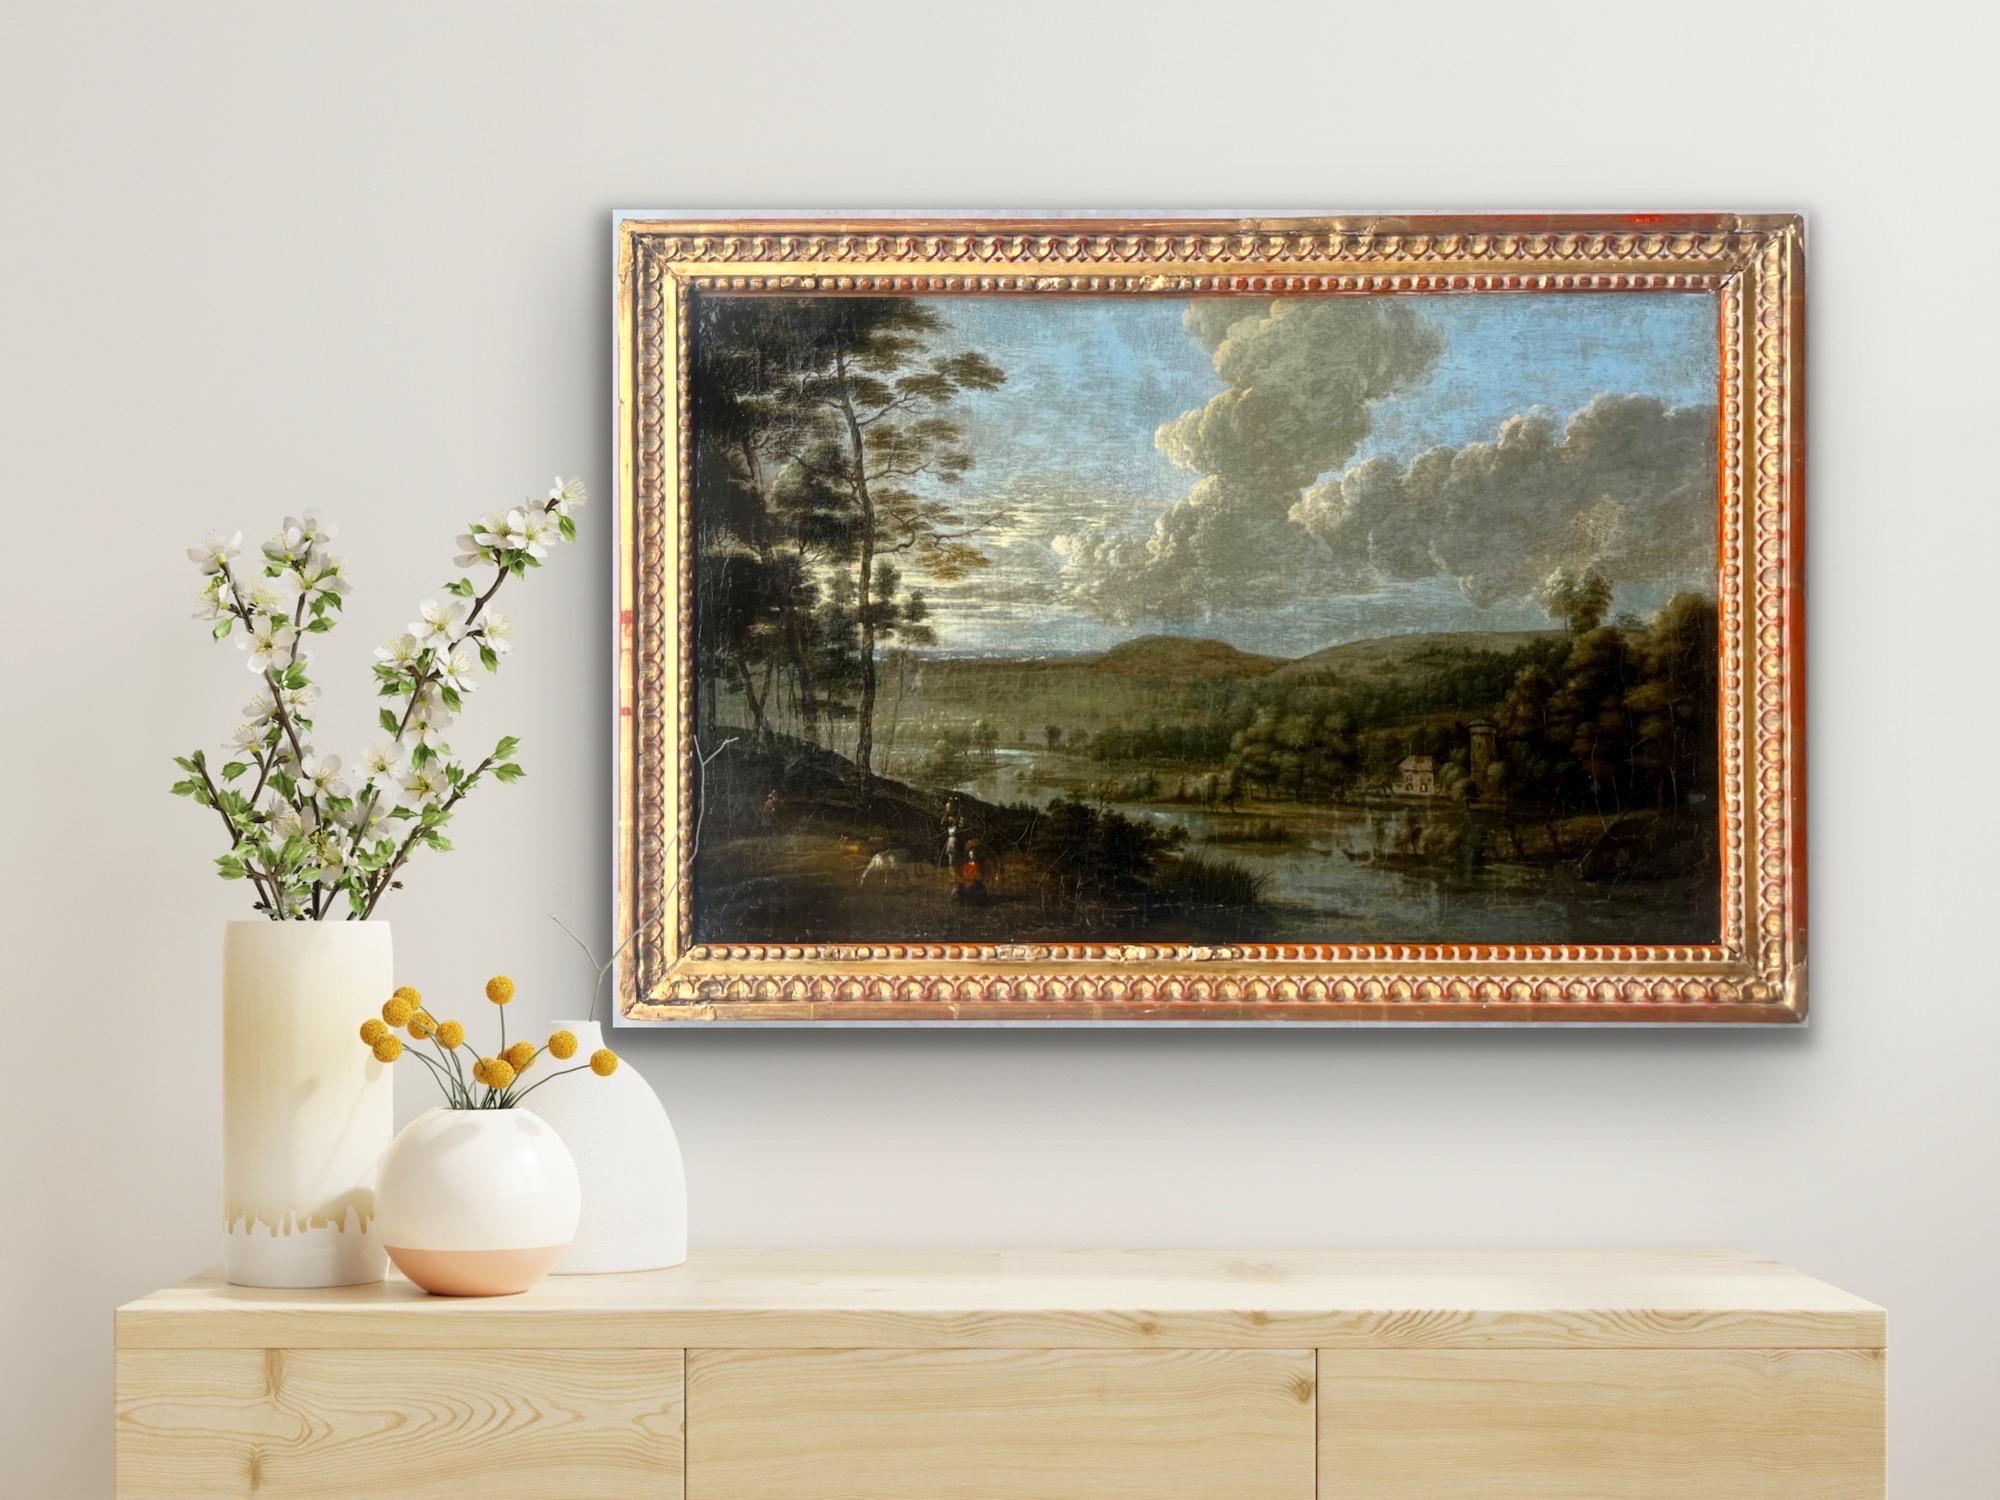 17th century Flemish Old Master painting - Countryside landscape - Rubens For Sale 2